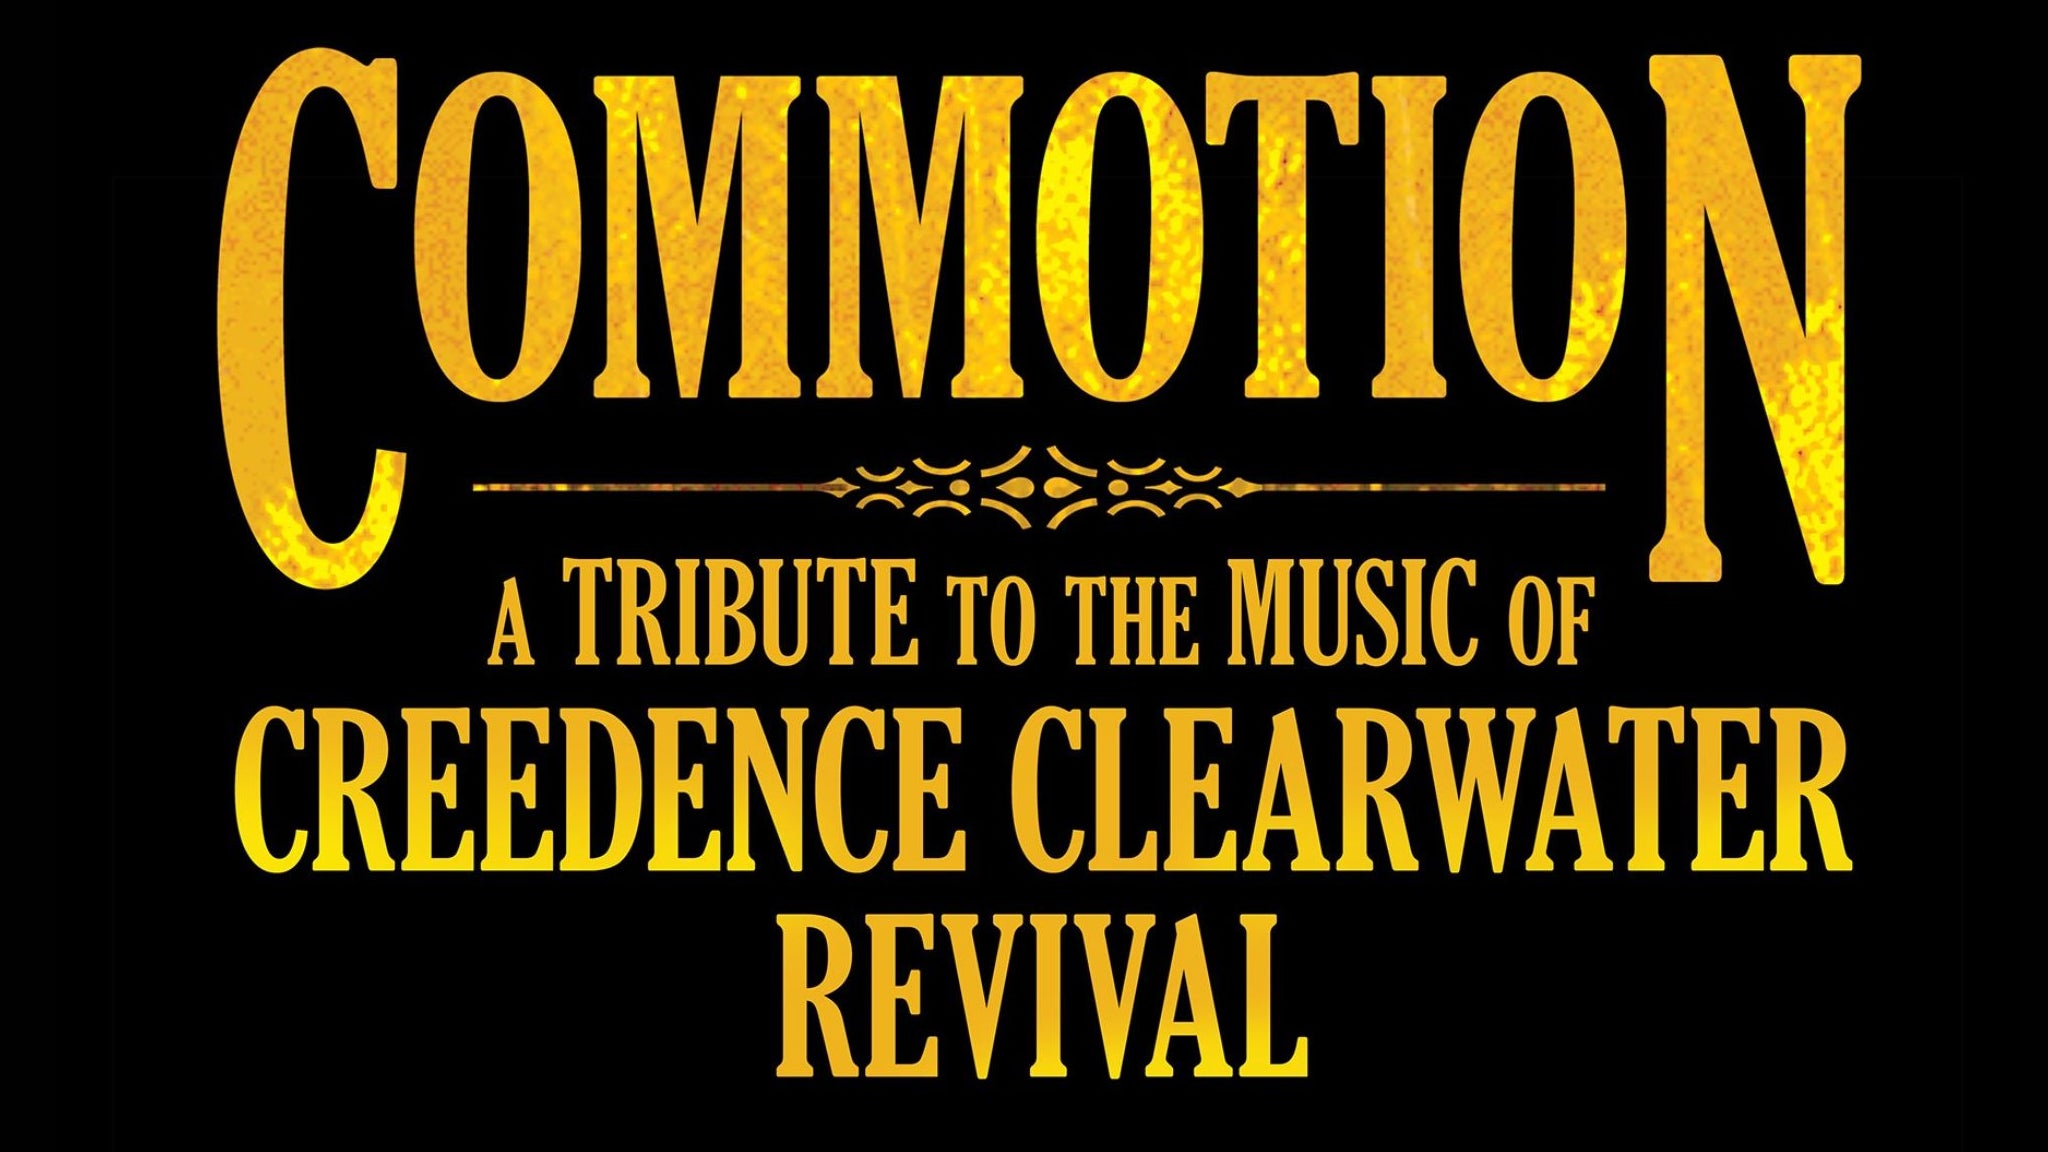 COMMOTION - A Tribute to the Music of Creedence Clearwater Revival